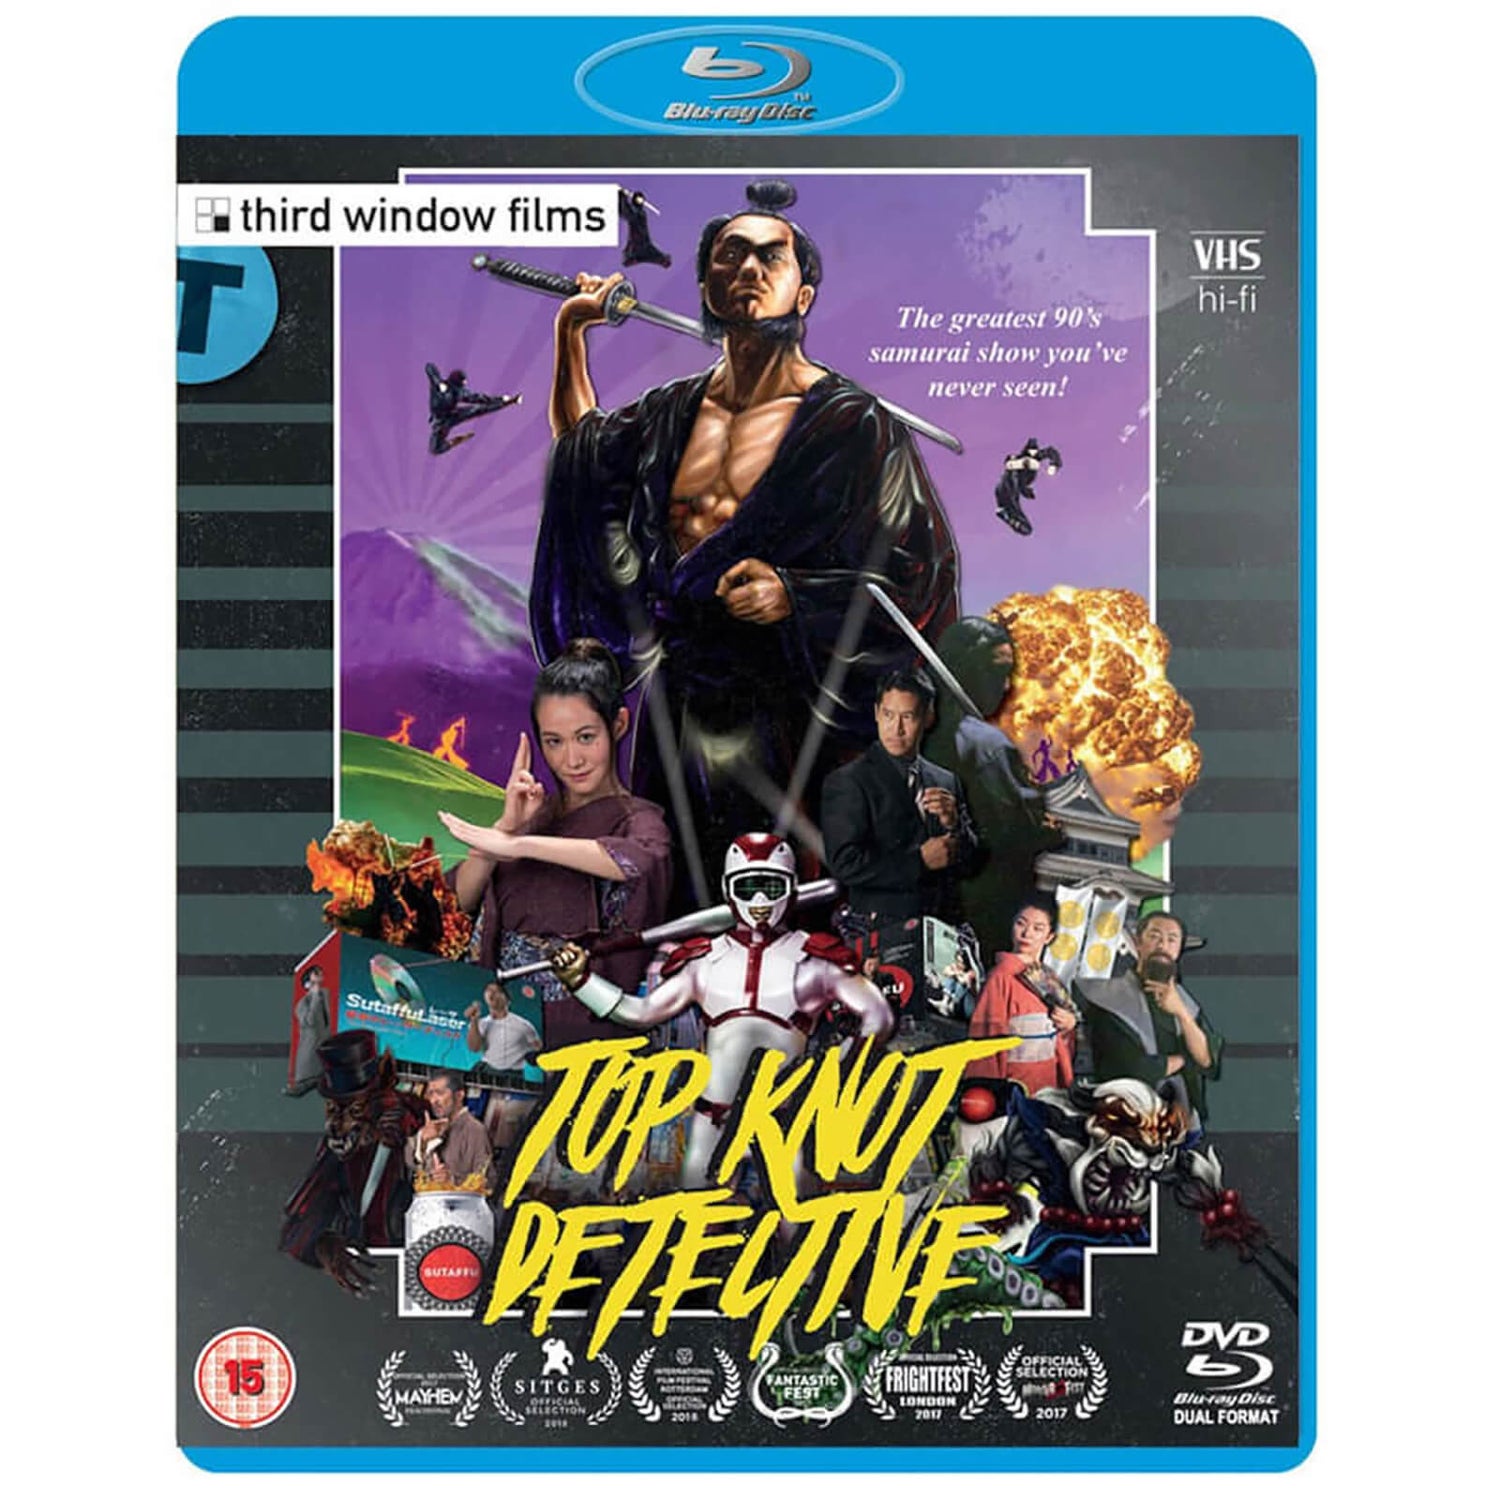 Top Knot Detective Blu-ray